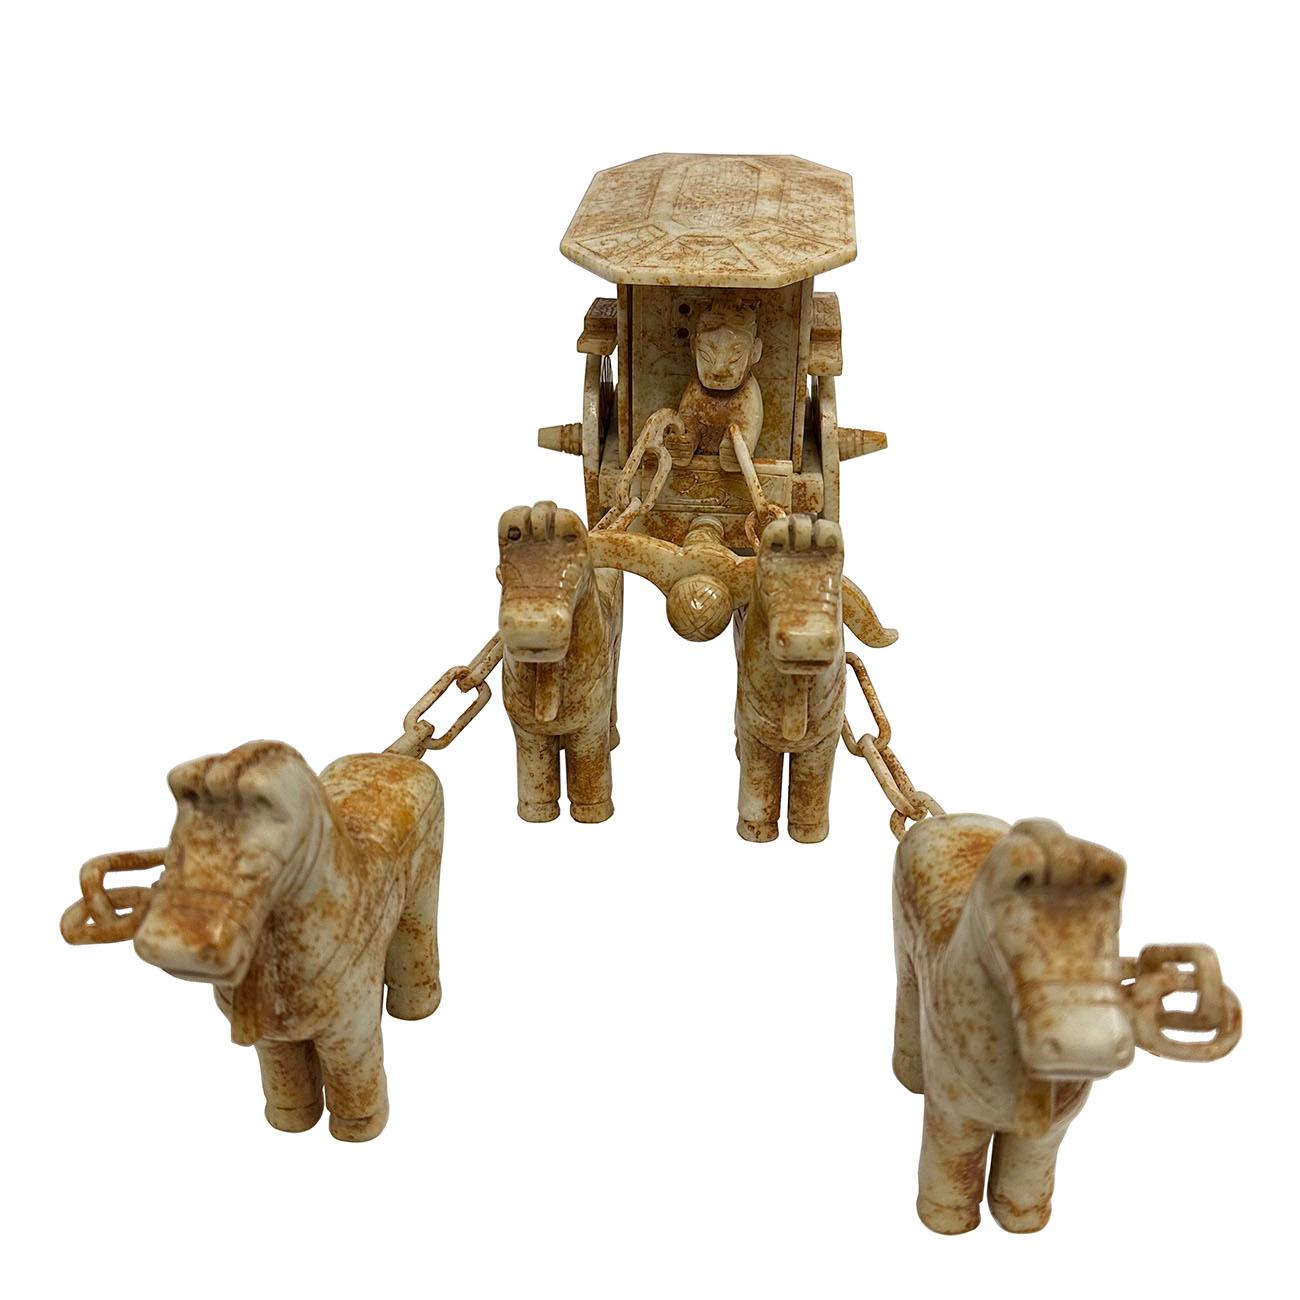 This set of Chinese Jade carved horse drawn carriage are hand crafted with exquisite detail. They were carved with a 